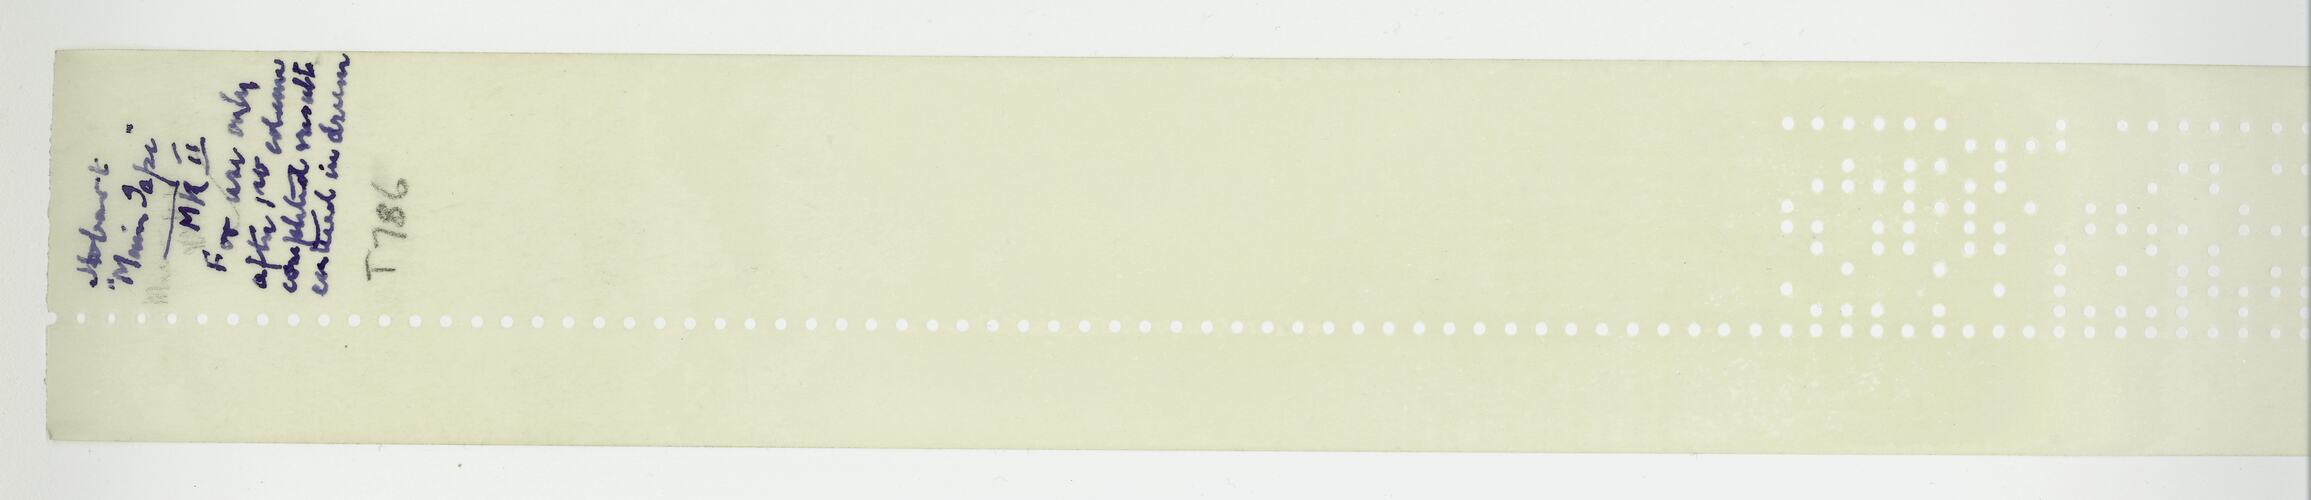 Length of paper tape with punched holes, text.